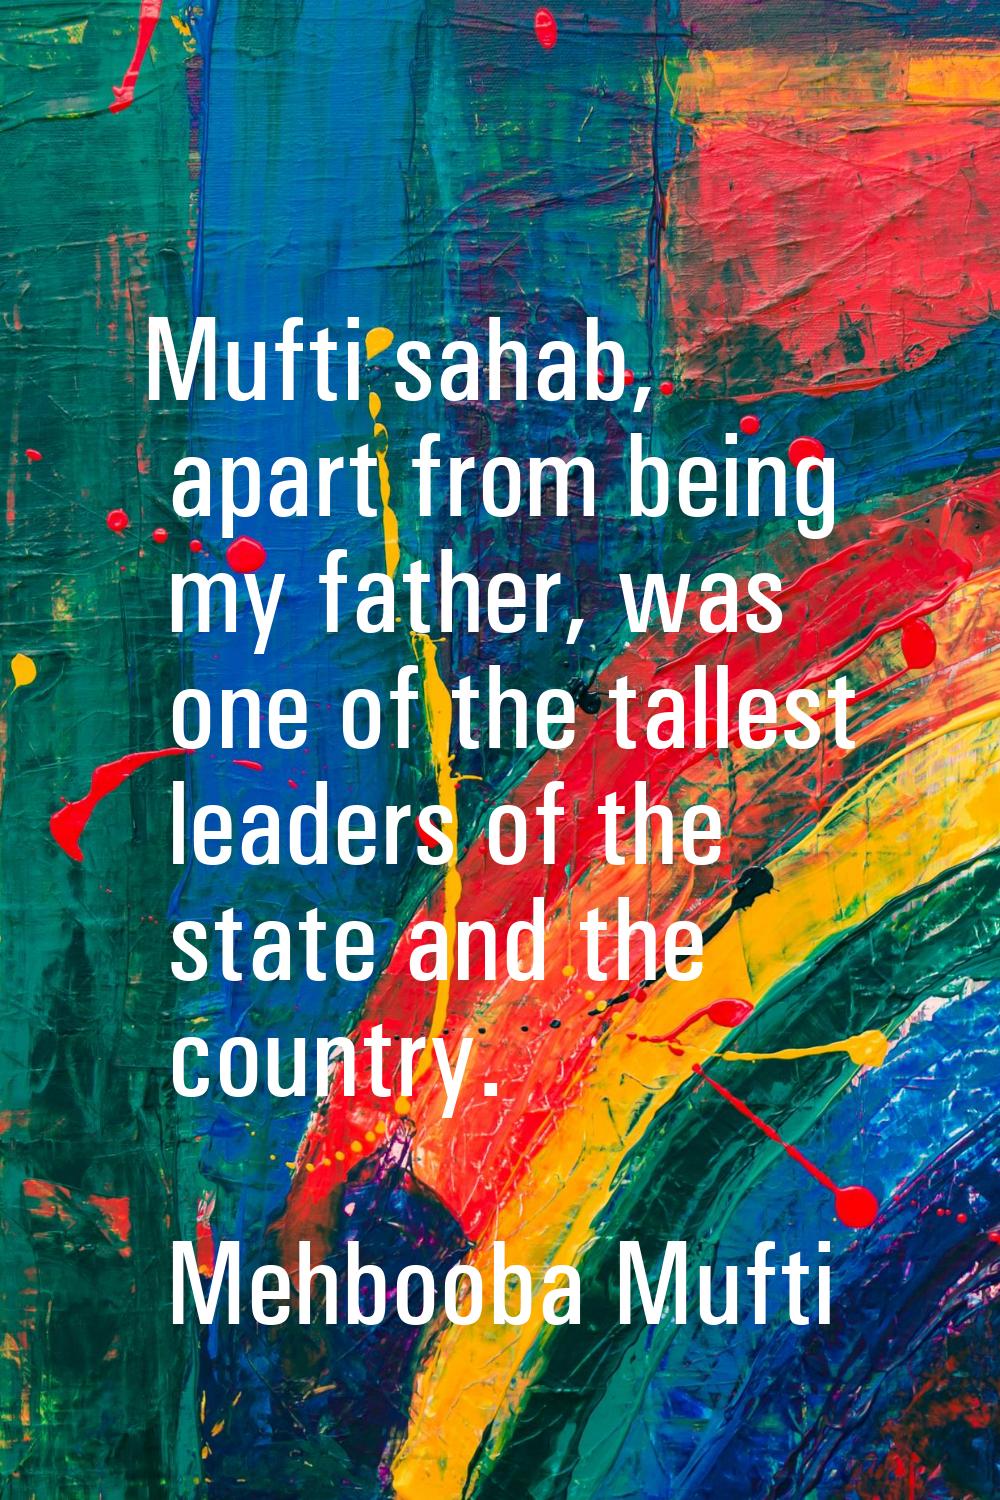 Mufti sahab, apart from being my father, was one of the tallest leaders of the state and the countr